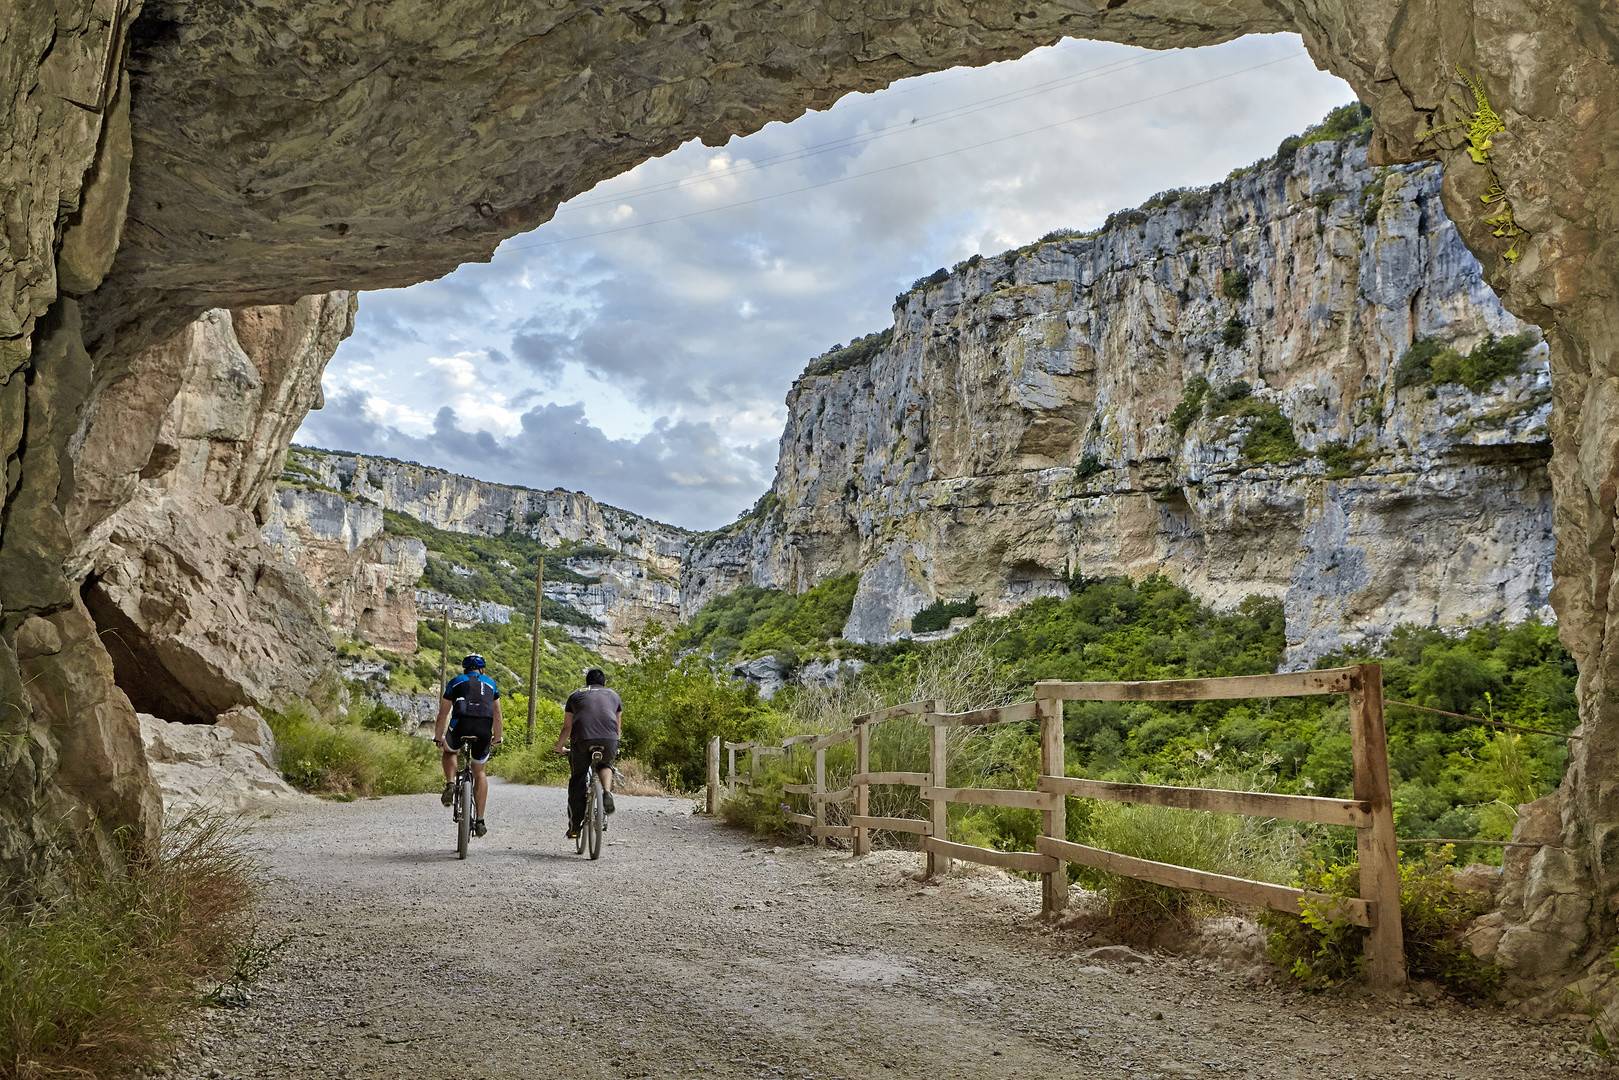 Other cycling routes to discover in Navarre